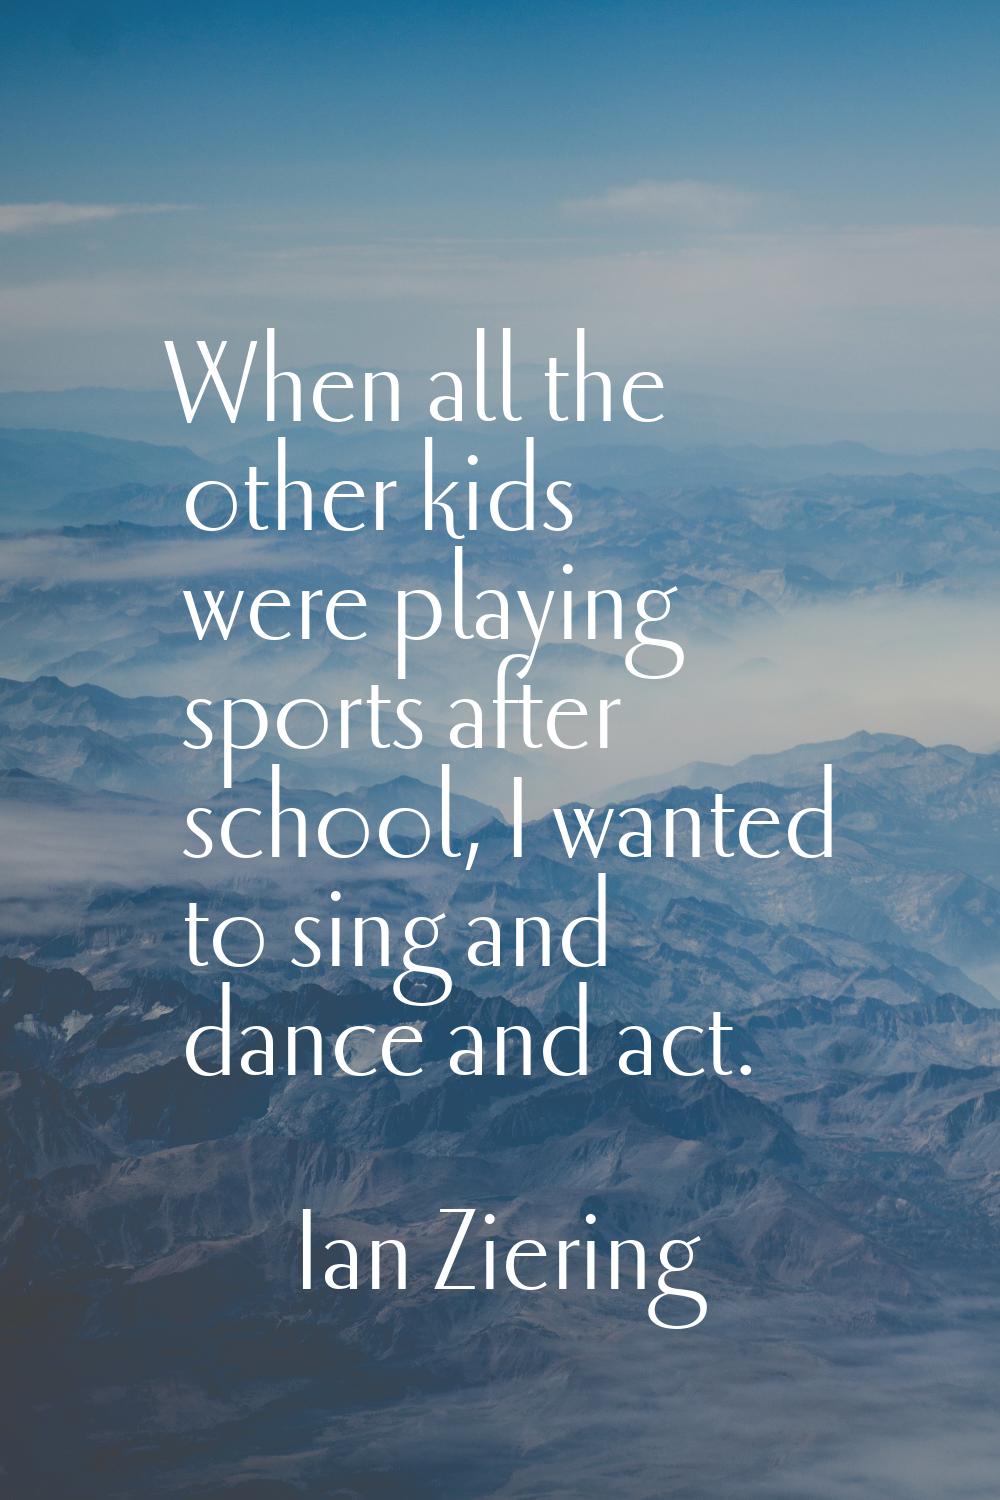 When all the other kids were playing sports after school, I wanted to sing and dance and act.